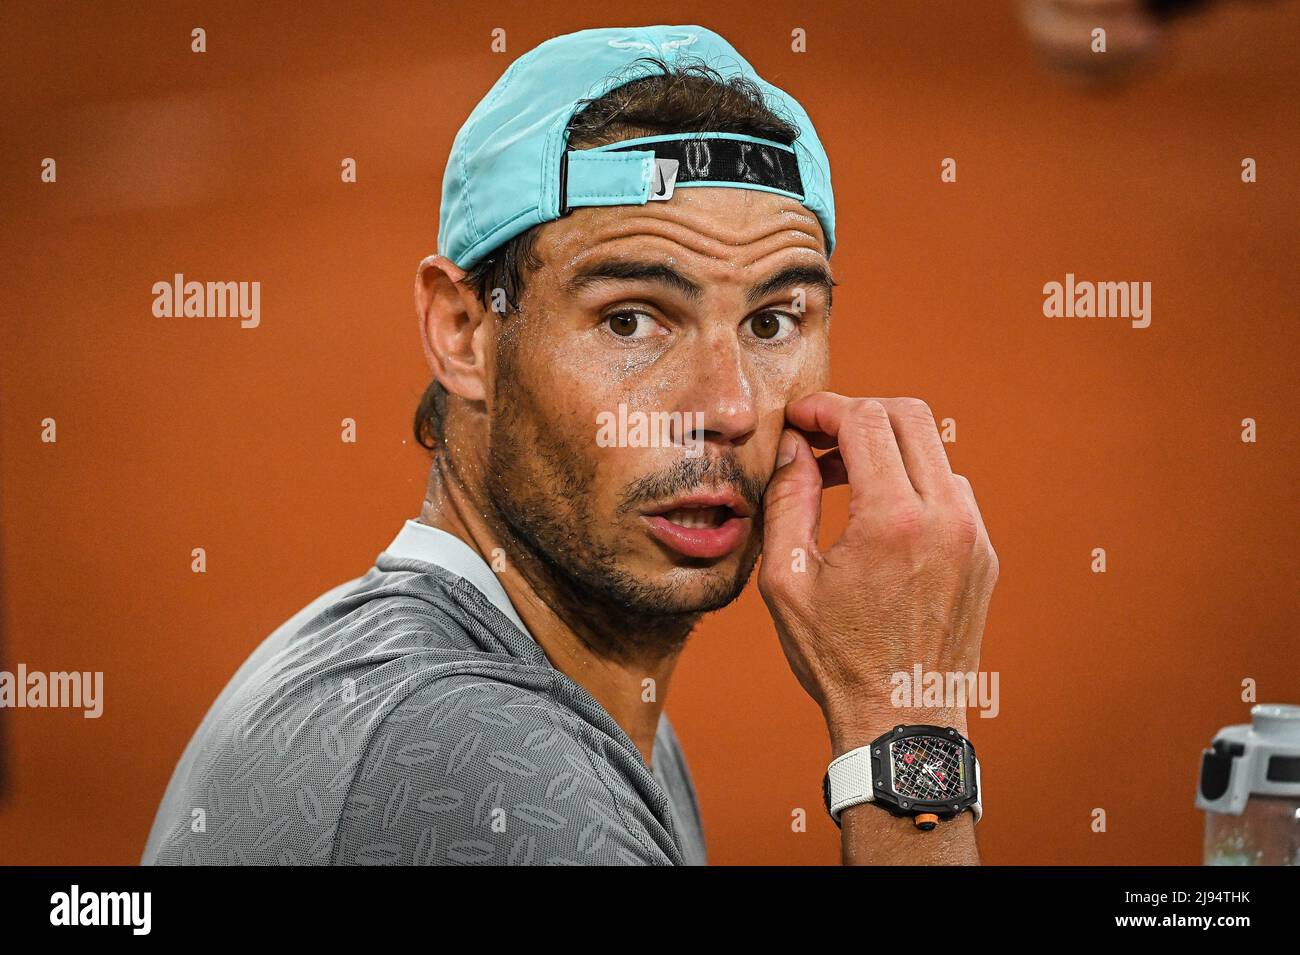 May 20, 2022, Paris, France Rafael NADAL of Spain during a training session of Roland-Garros 2022, French Open 2022, Grand Slam tennis tournament on May 20, 2022 at the Roland-Garros stadium in